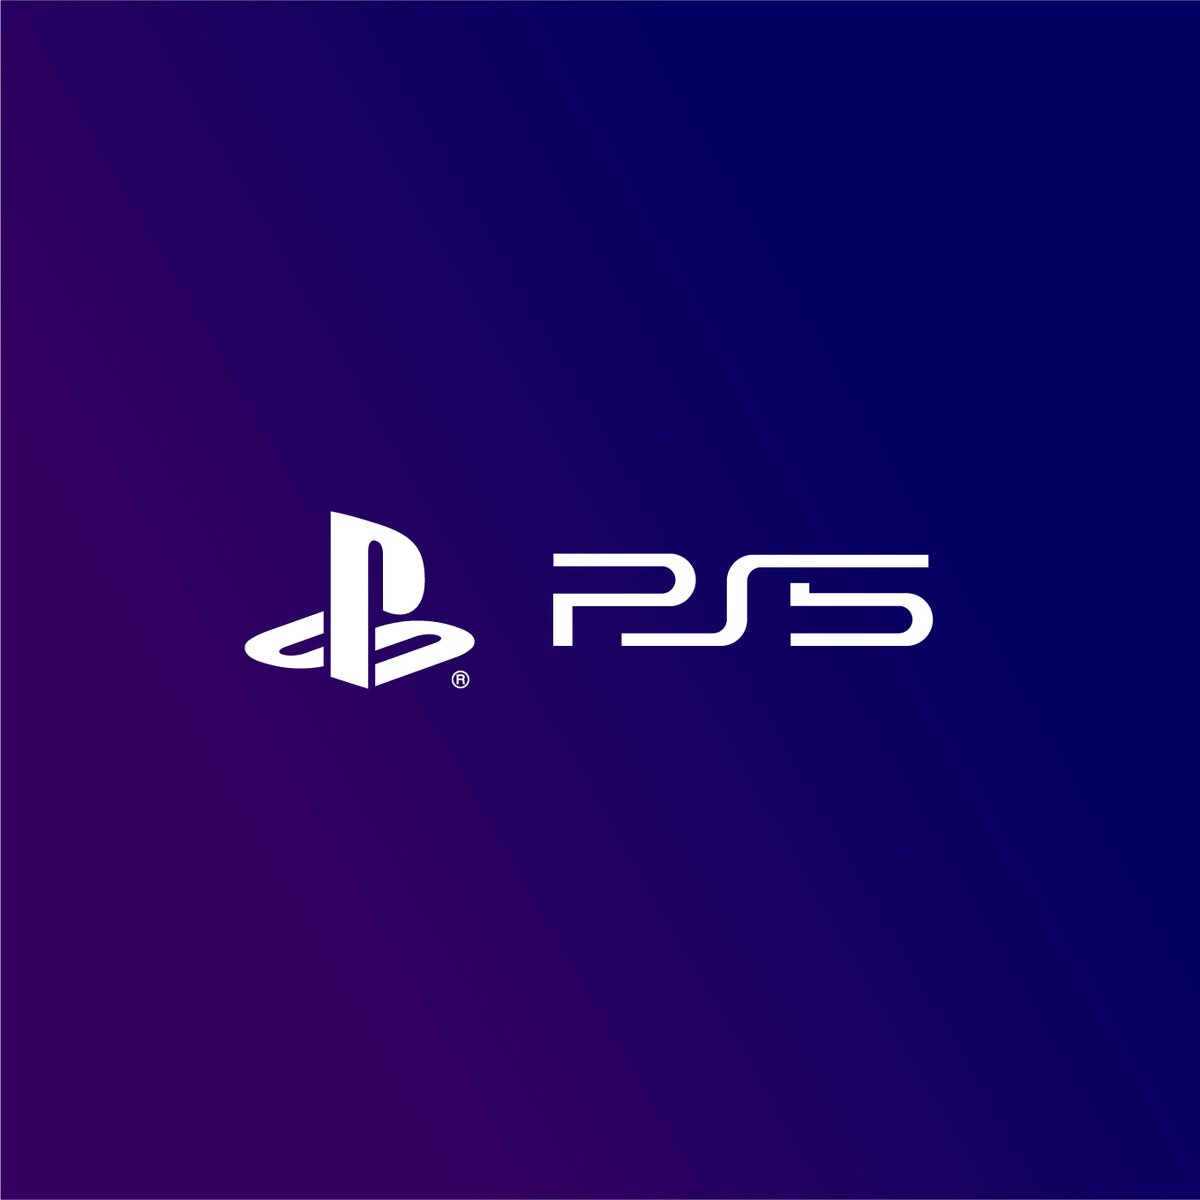 9 suka. #ps5. logo hater but all this turmoil around inspired me to create ...